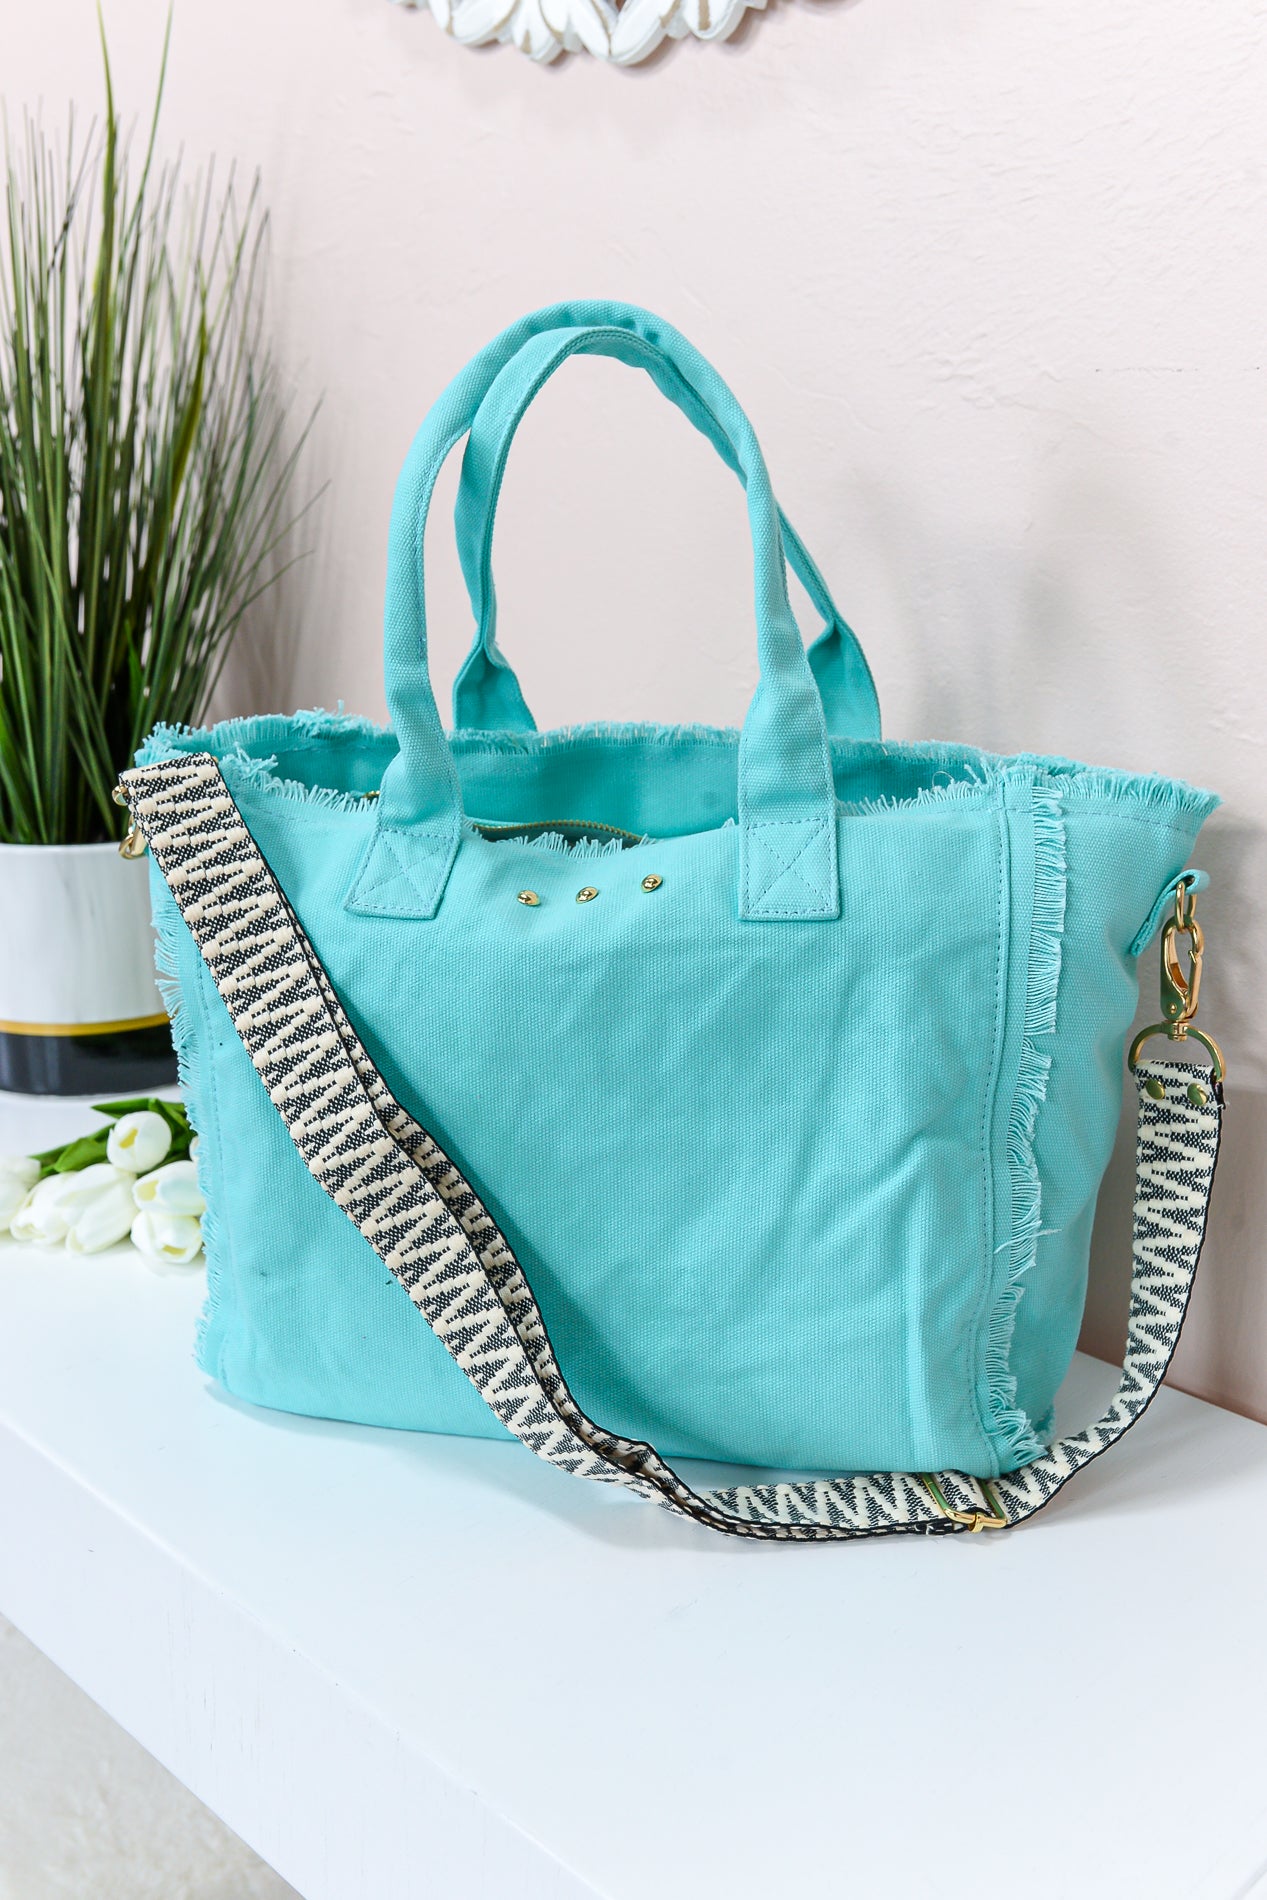 Not Over The Drama Turquoise/Gold Frayed Bag - BAG1735TU